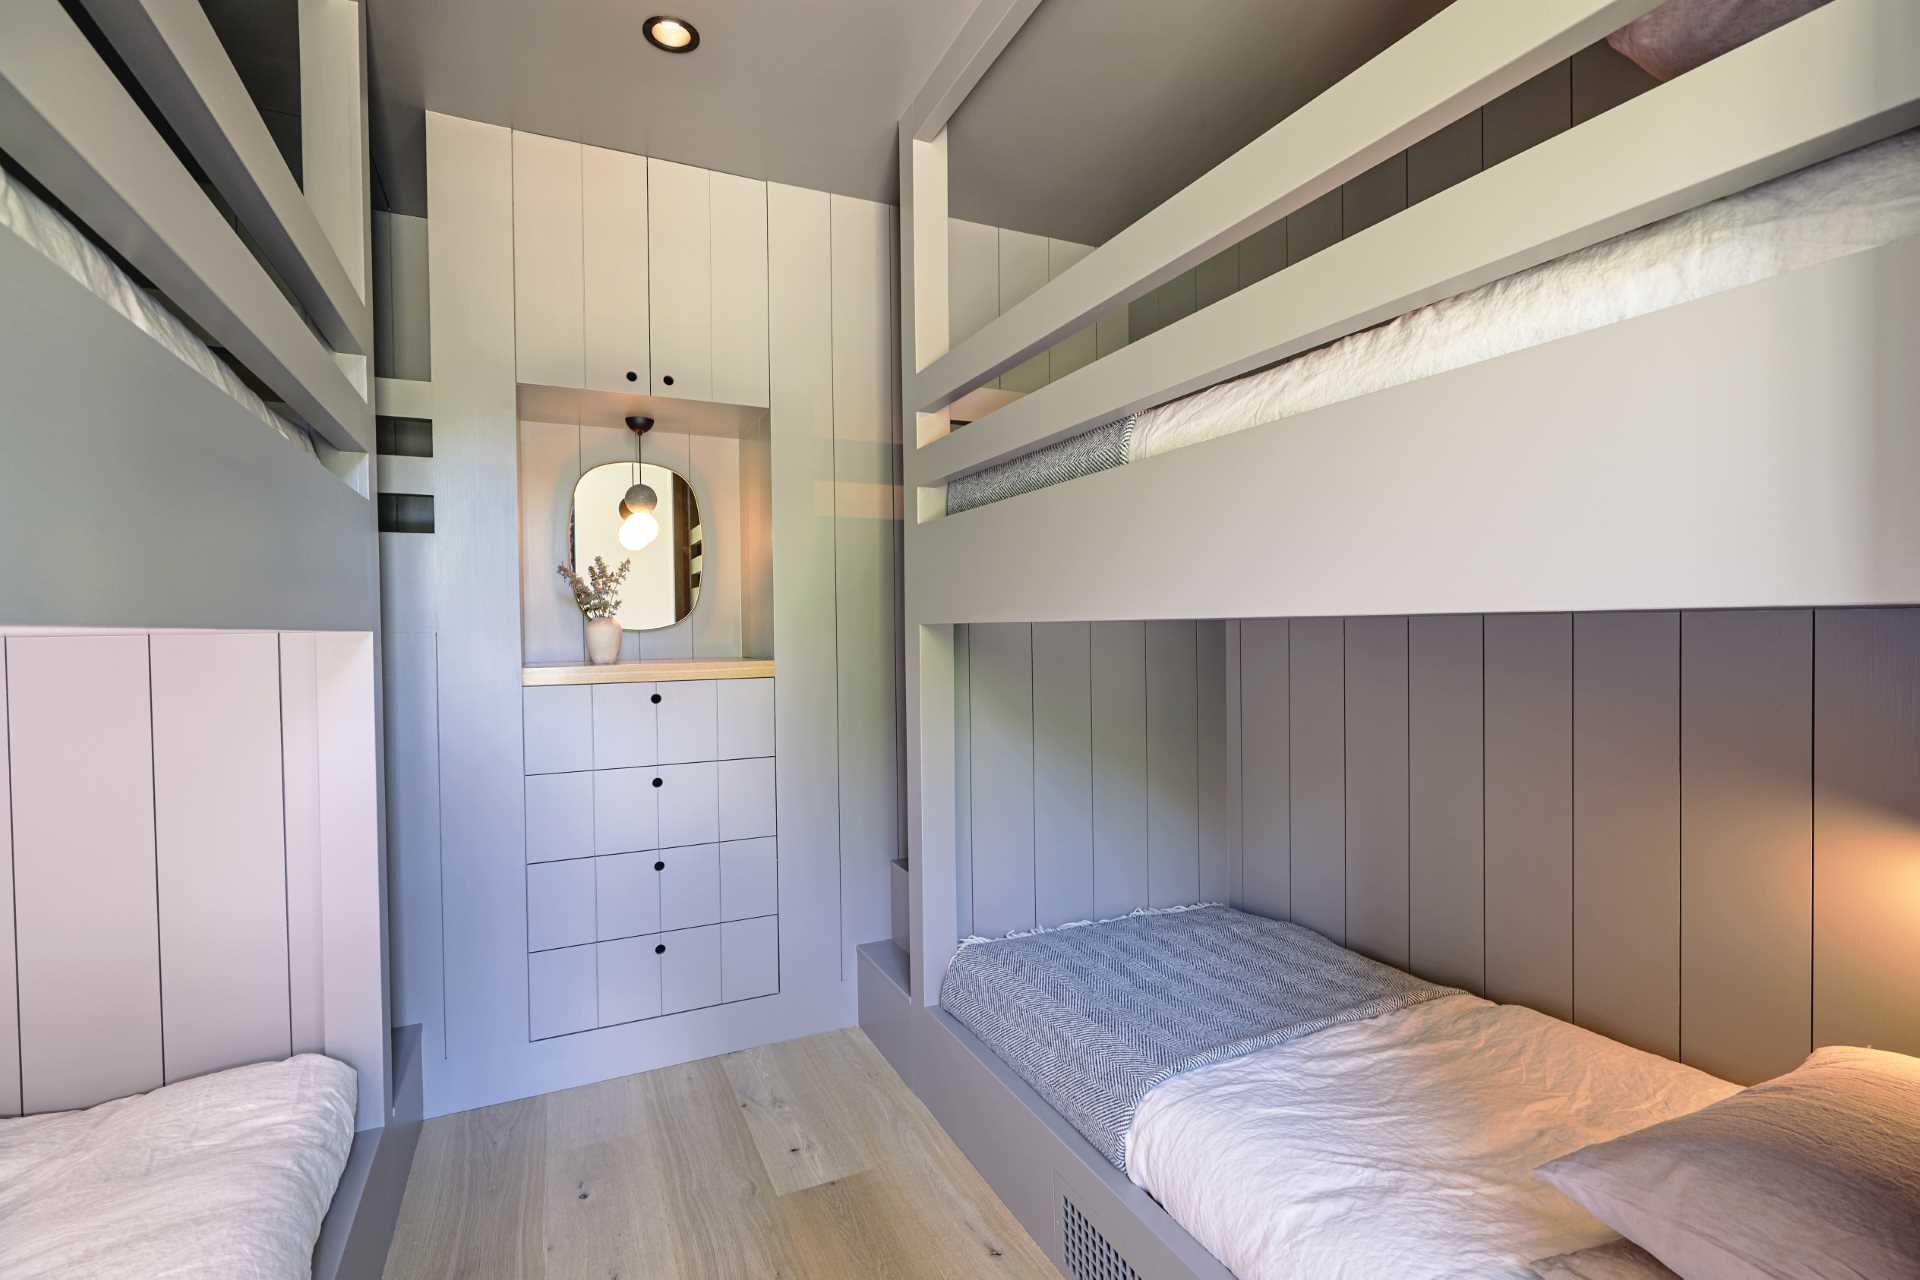 A modern bedroom with multiple bunk beds.